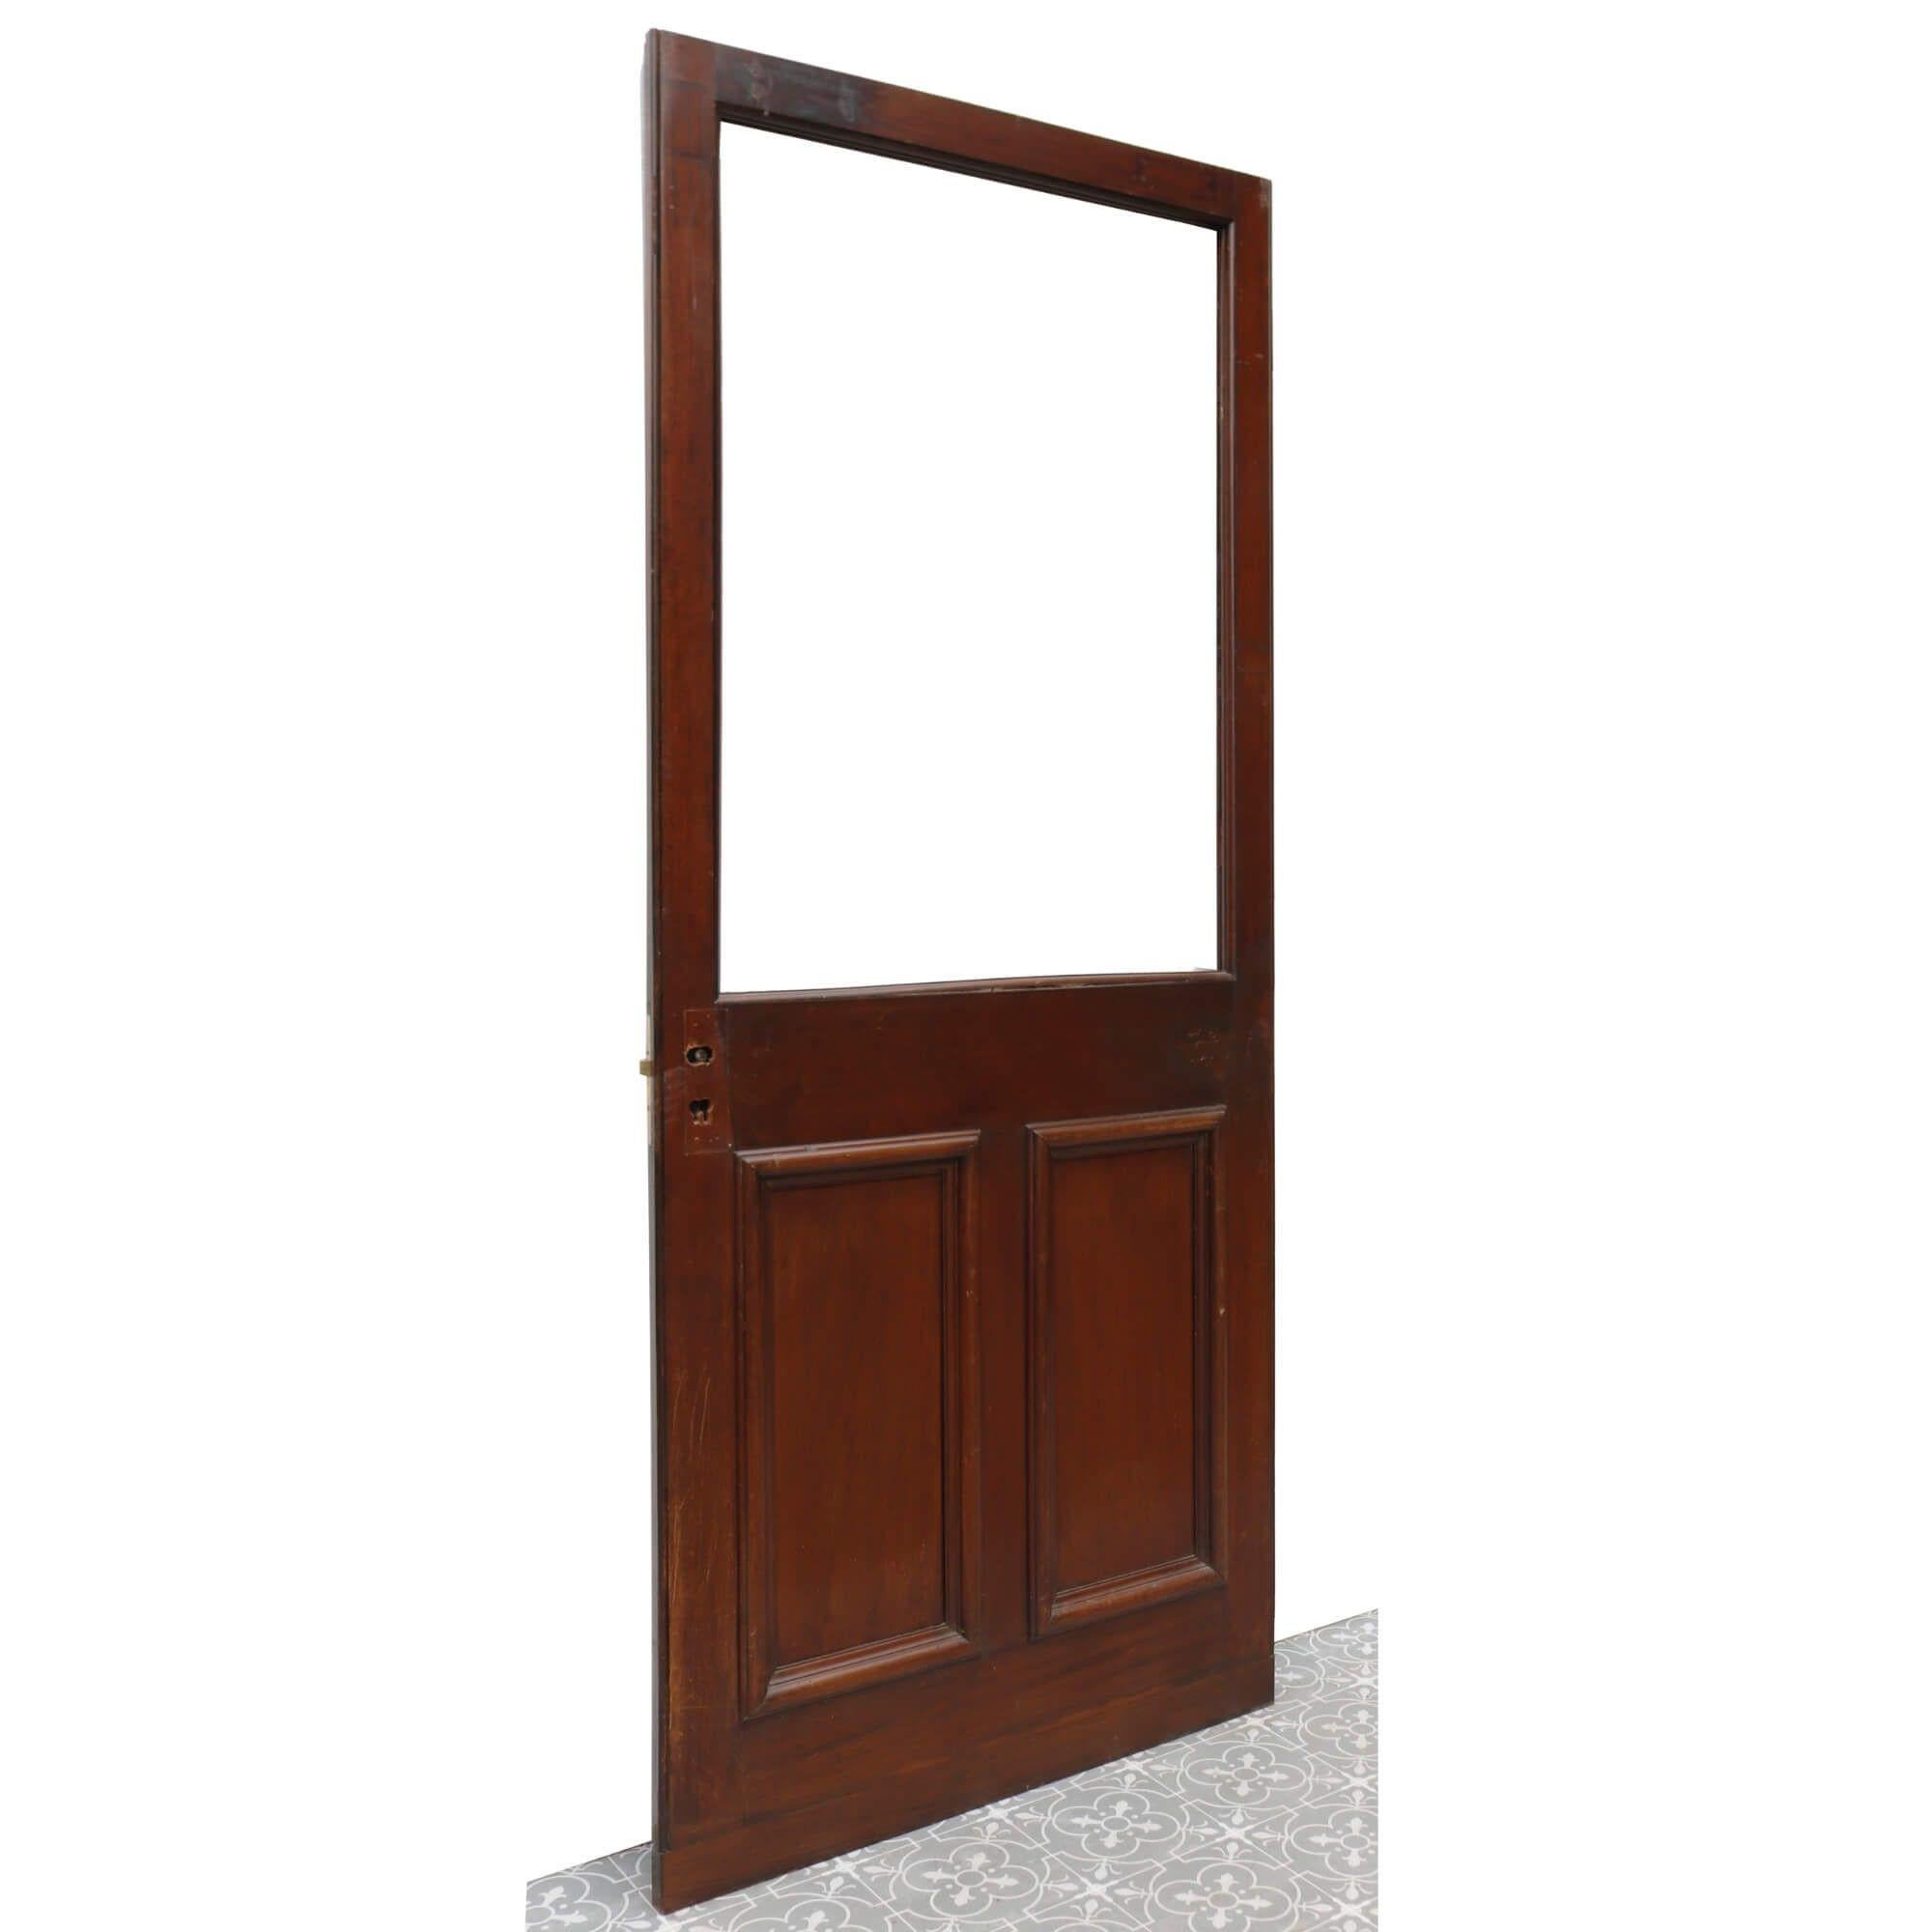 This unglazed reclaimed mahogany door dates from the Victorian era. It is over 130 years old and is in good structural condition featuring gunstock construction and a rich mahogany wood finish. The bottom half of the door is detailed with a pair of